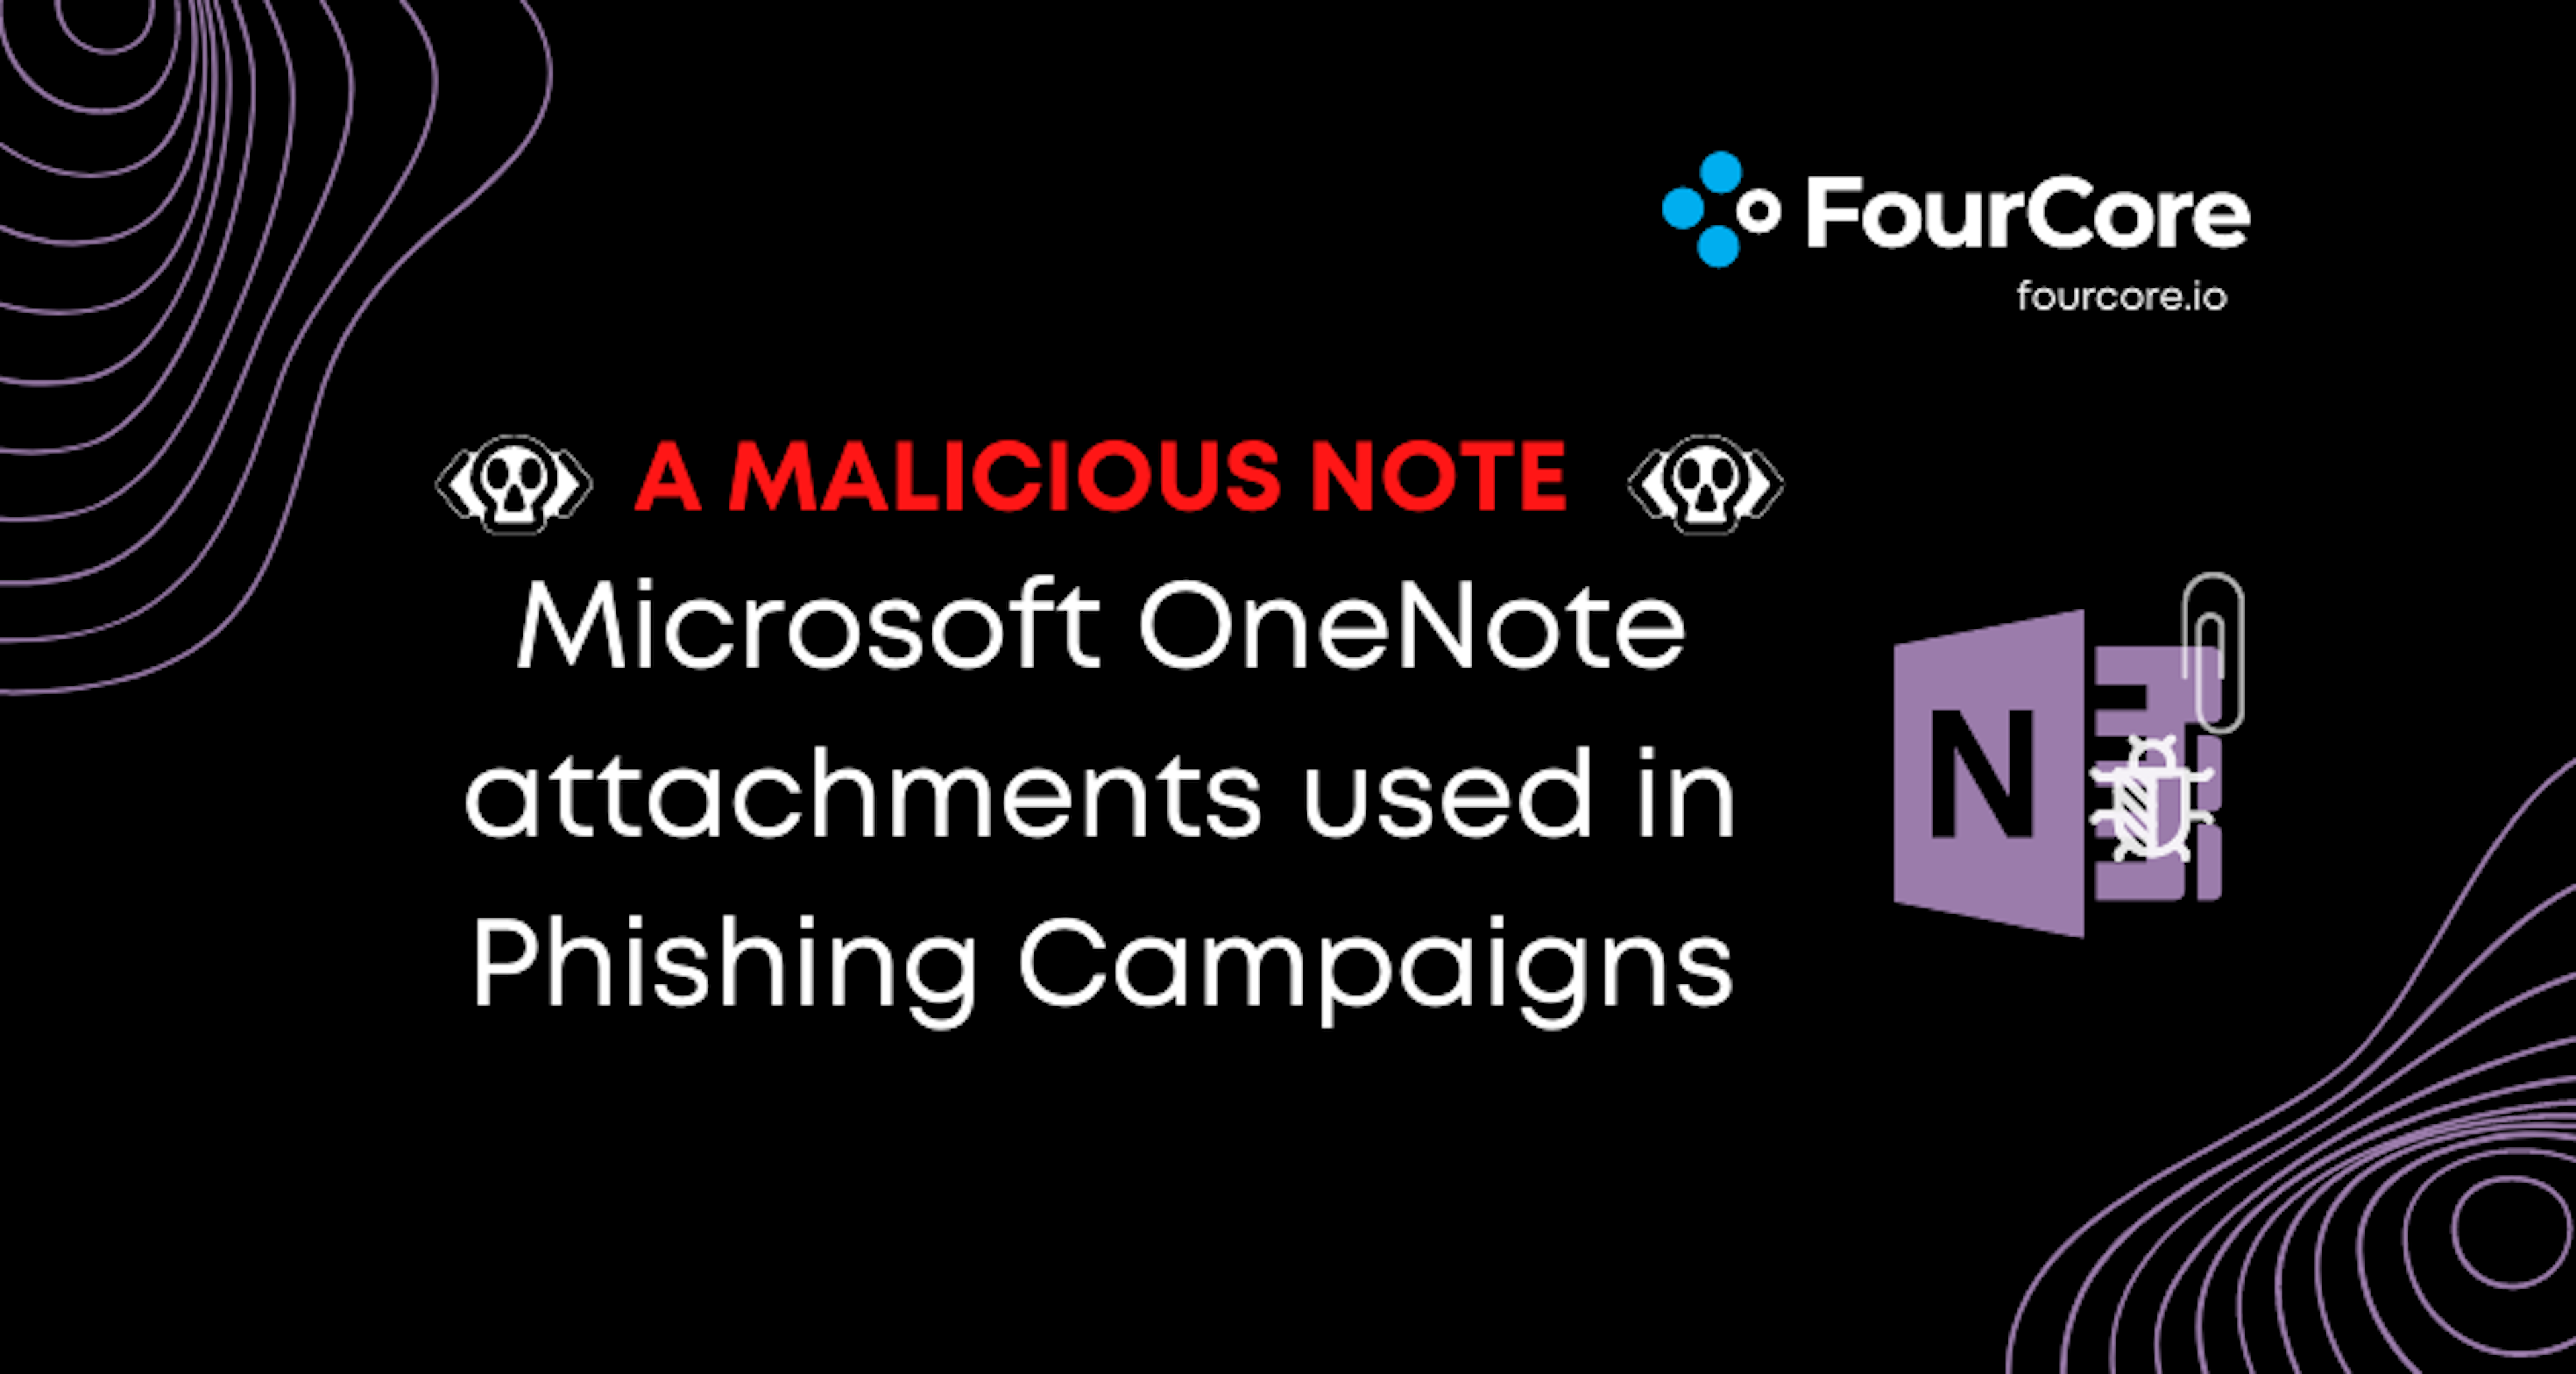 A Malicious Note: Hackers using Microsoft OneNote Attachments to spread malware  Blog Post Image